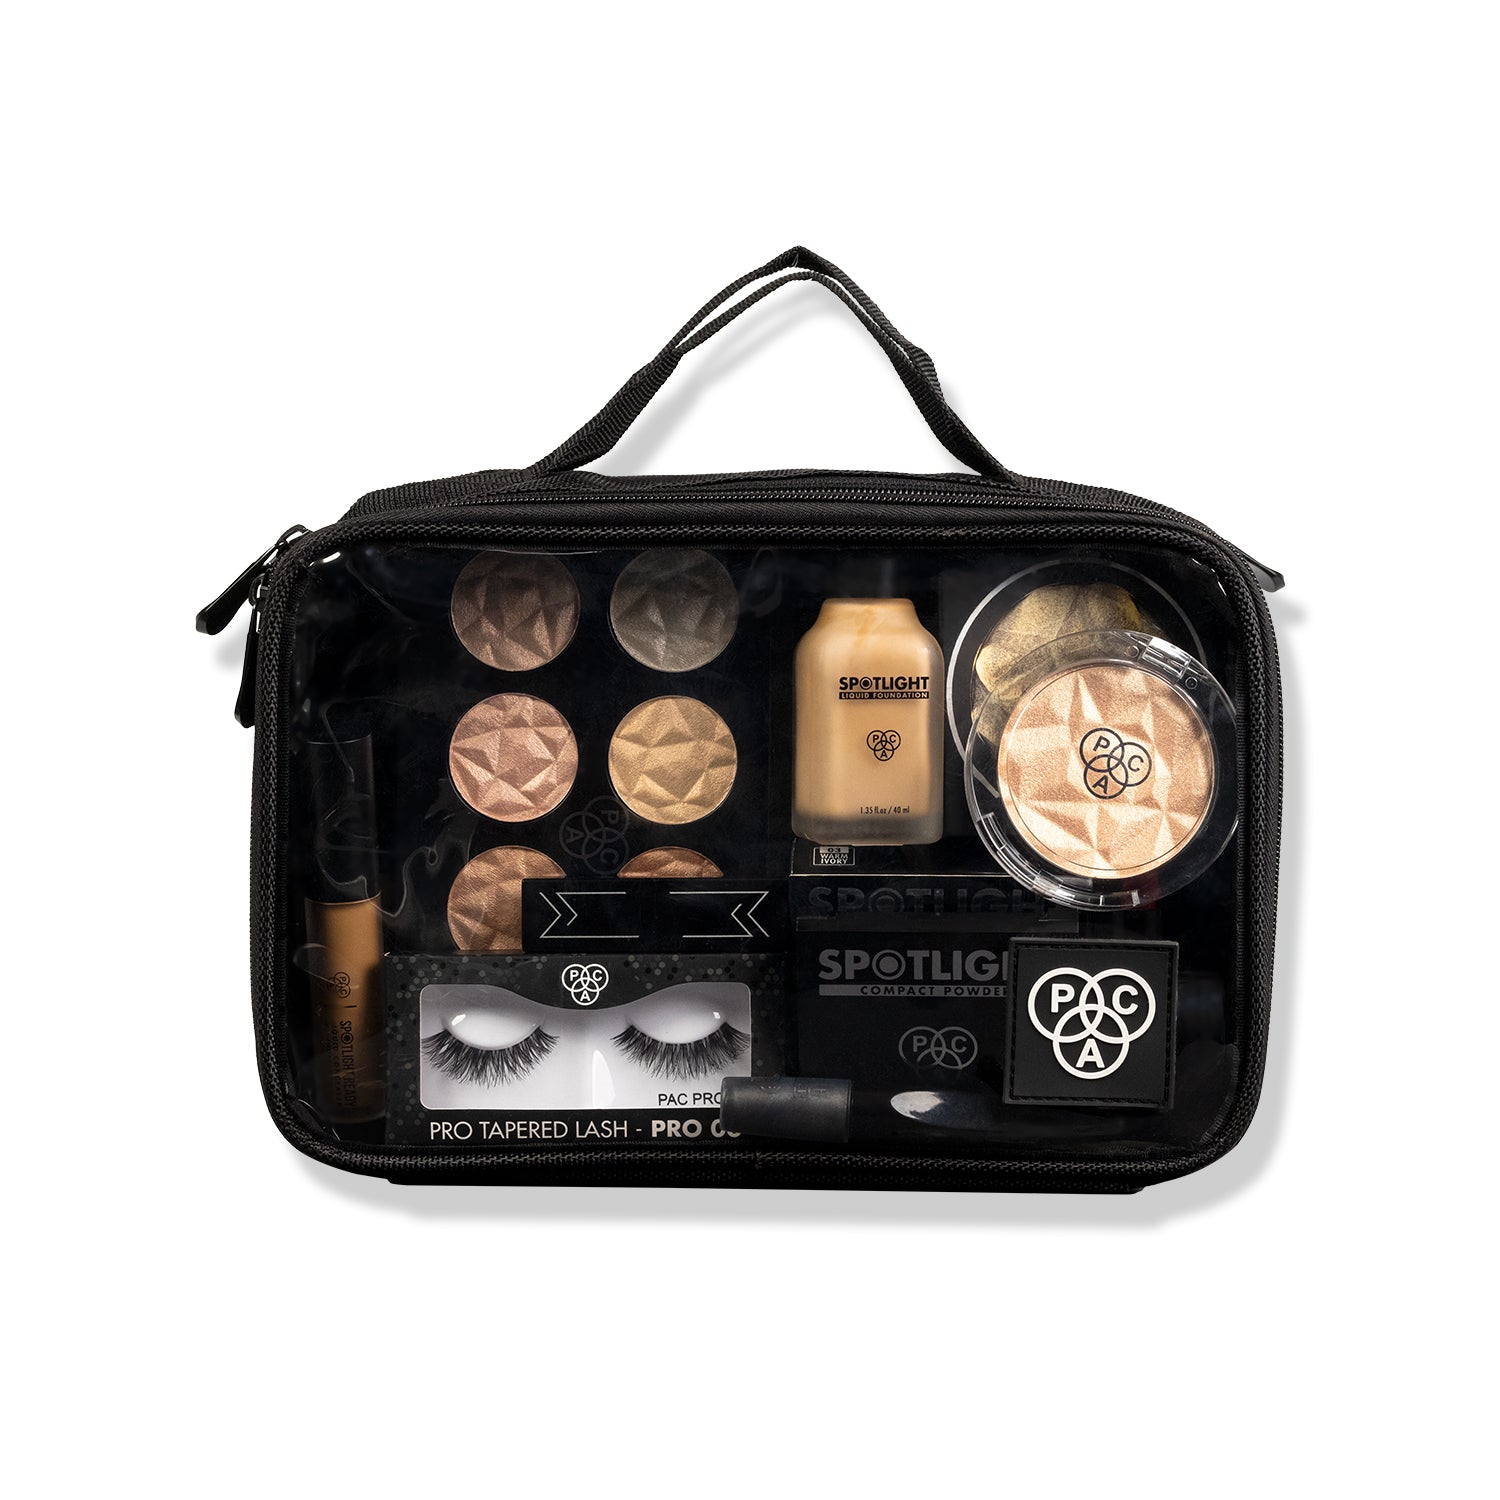 PAC Cosmetics Travel With Me Makeup Pouch